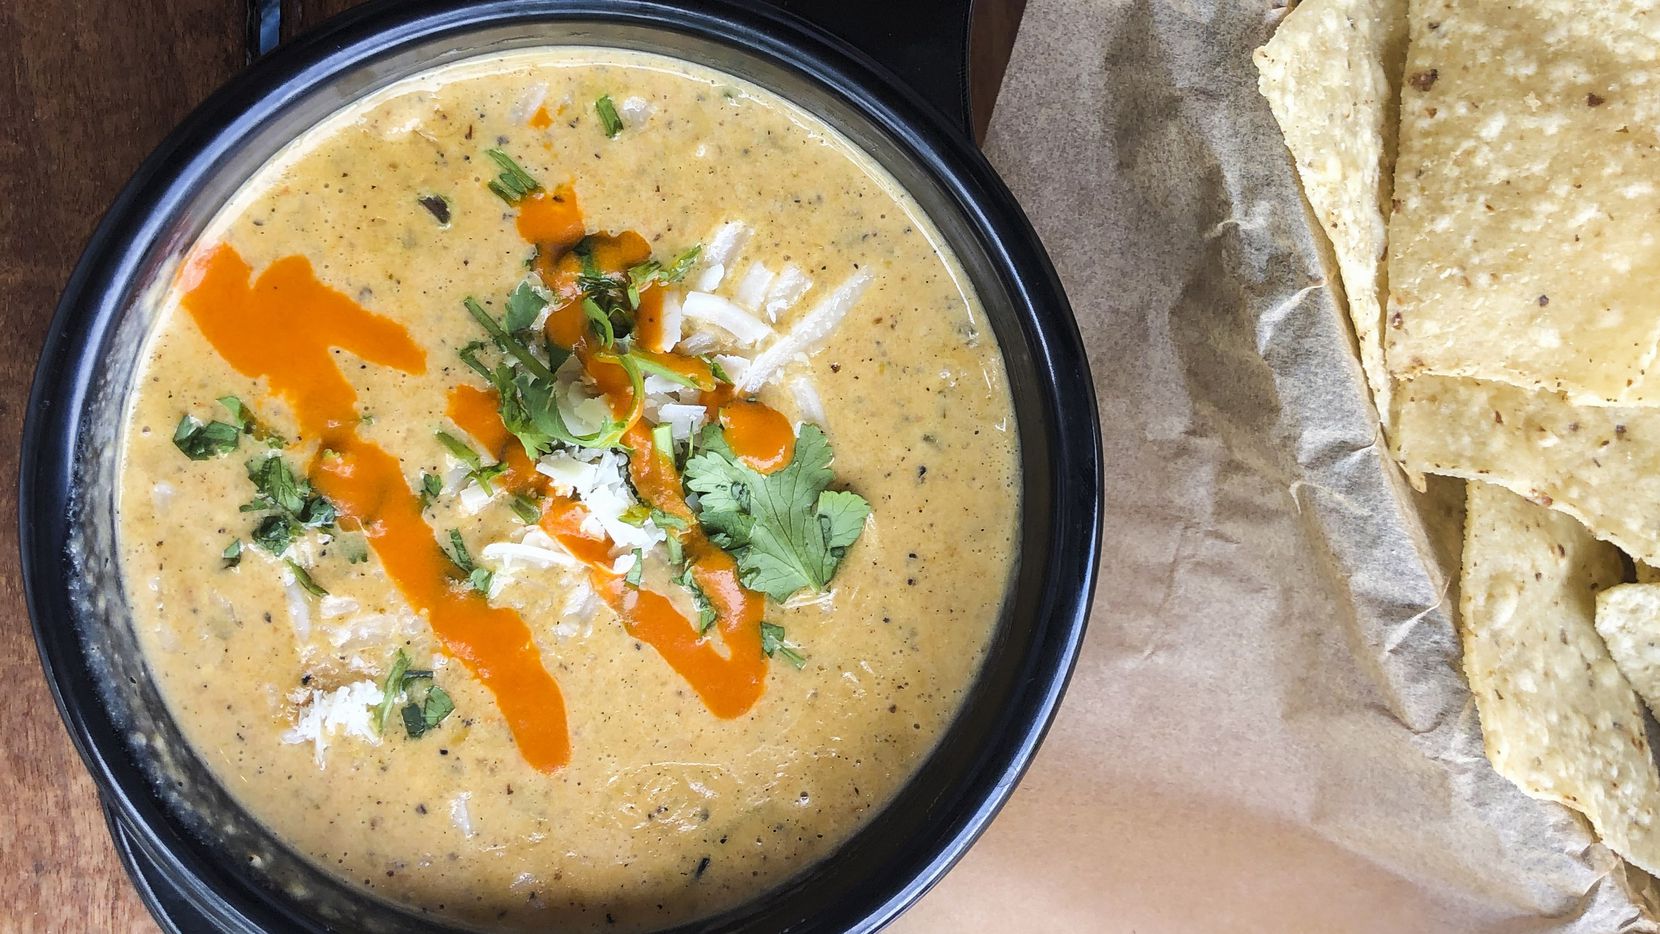 Torchy’s Tacos' queso sold in grocery stores in Texas